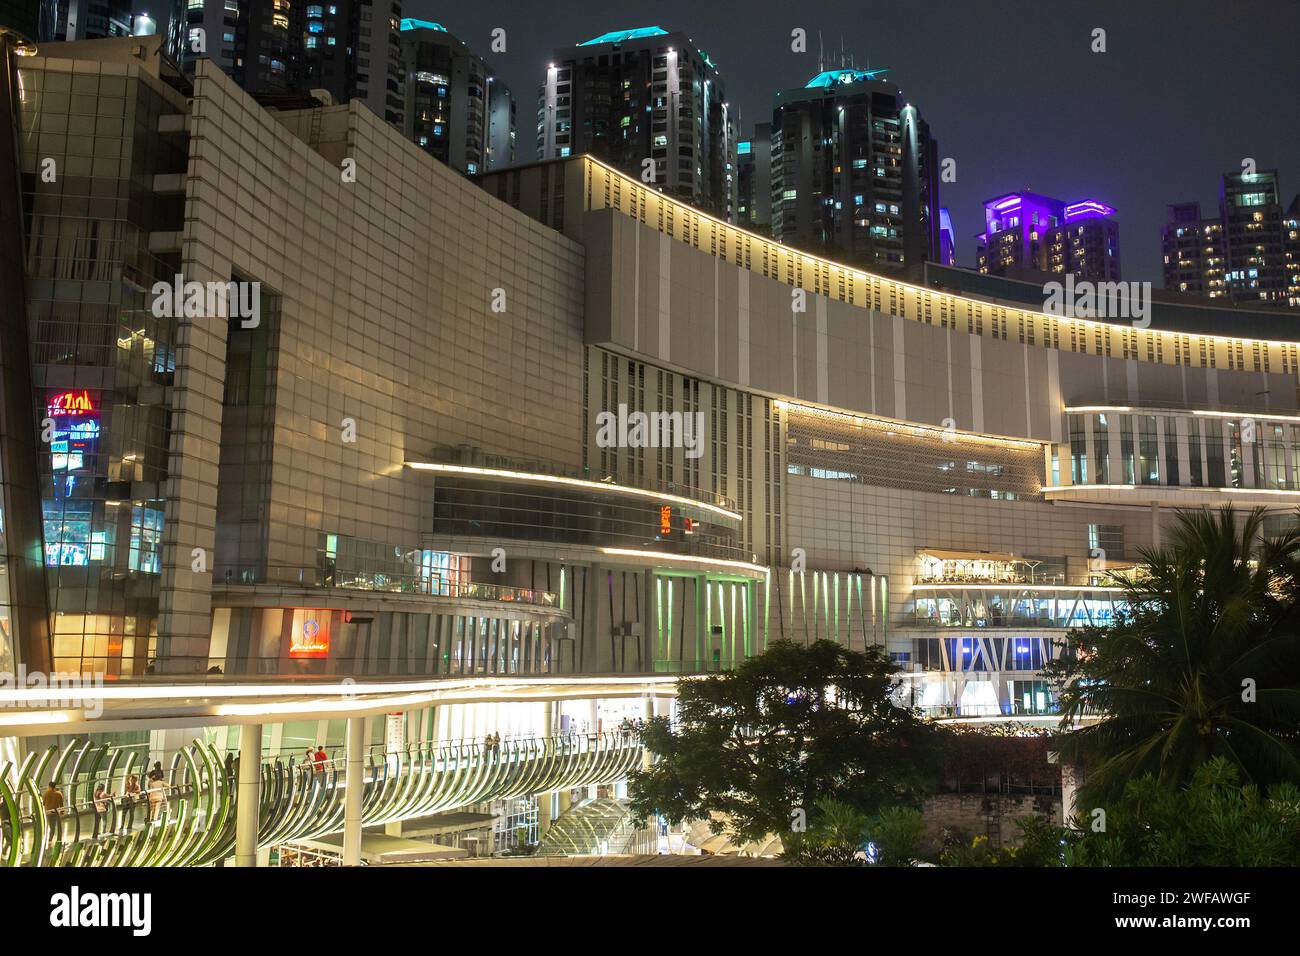 Jakarta, Indonesia - April 30, 2023: Central Park shopping mall in Jakarta, Indonesia. Stock Photo